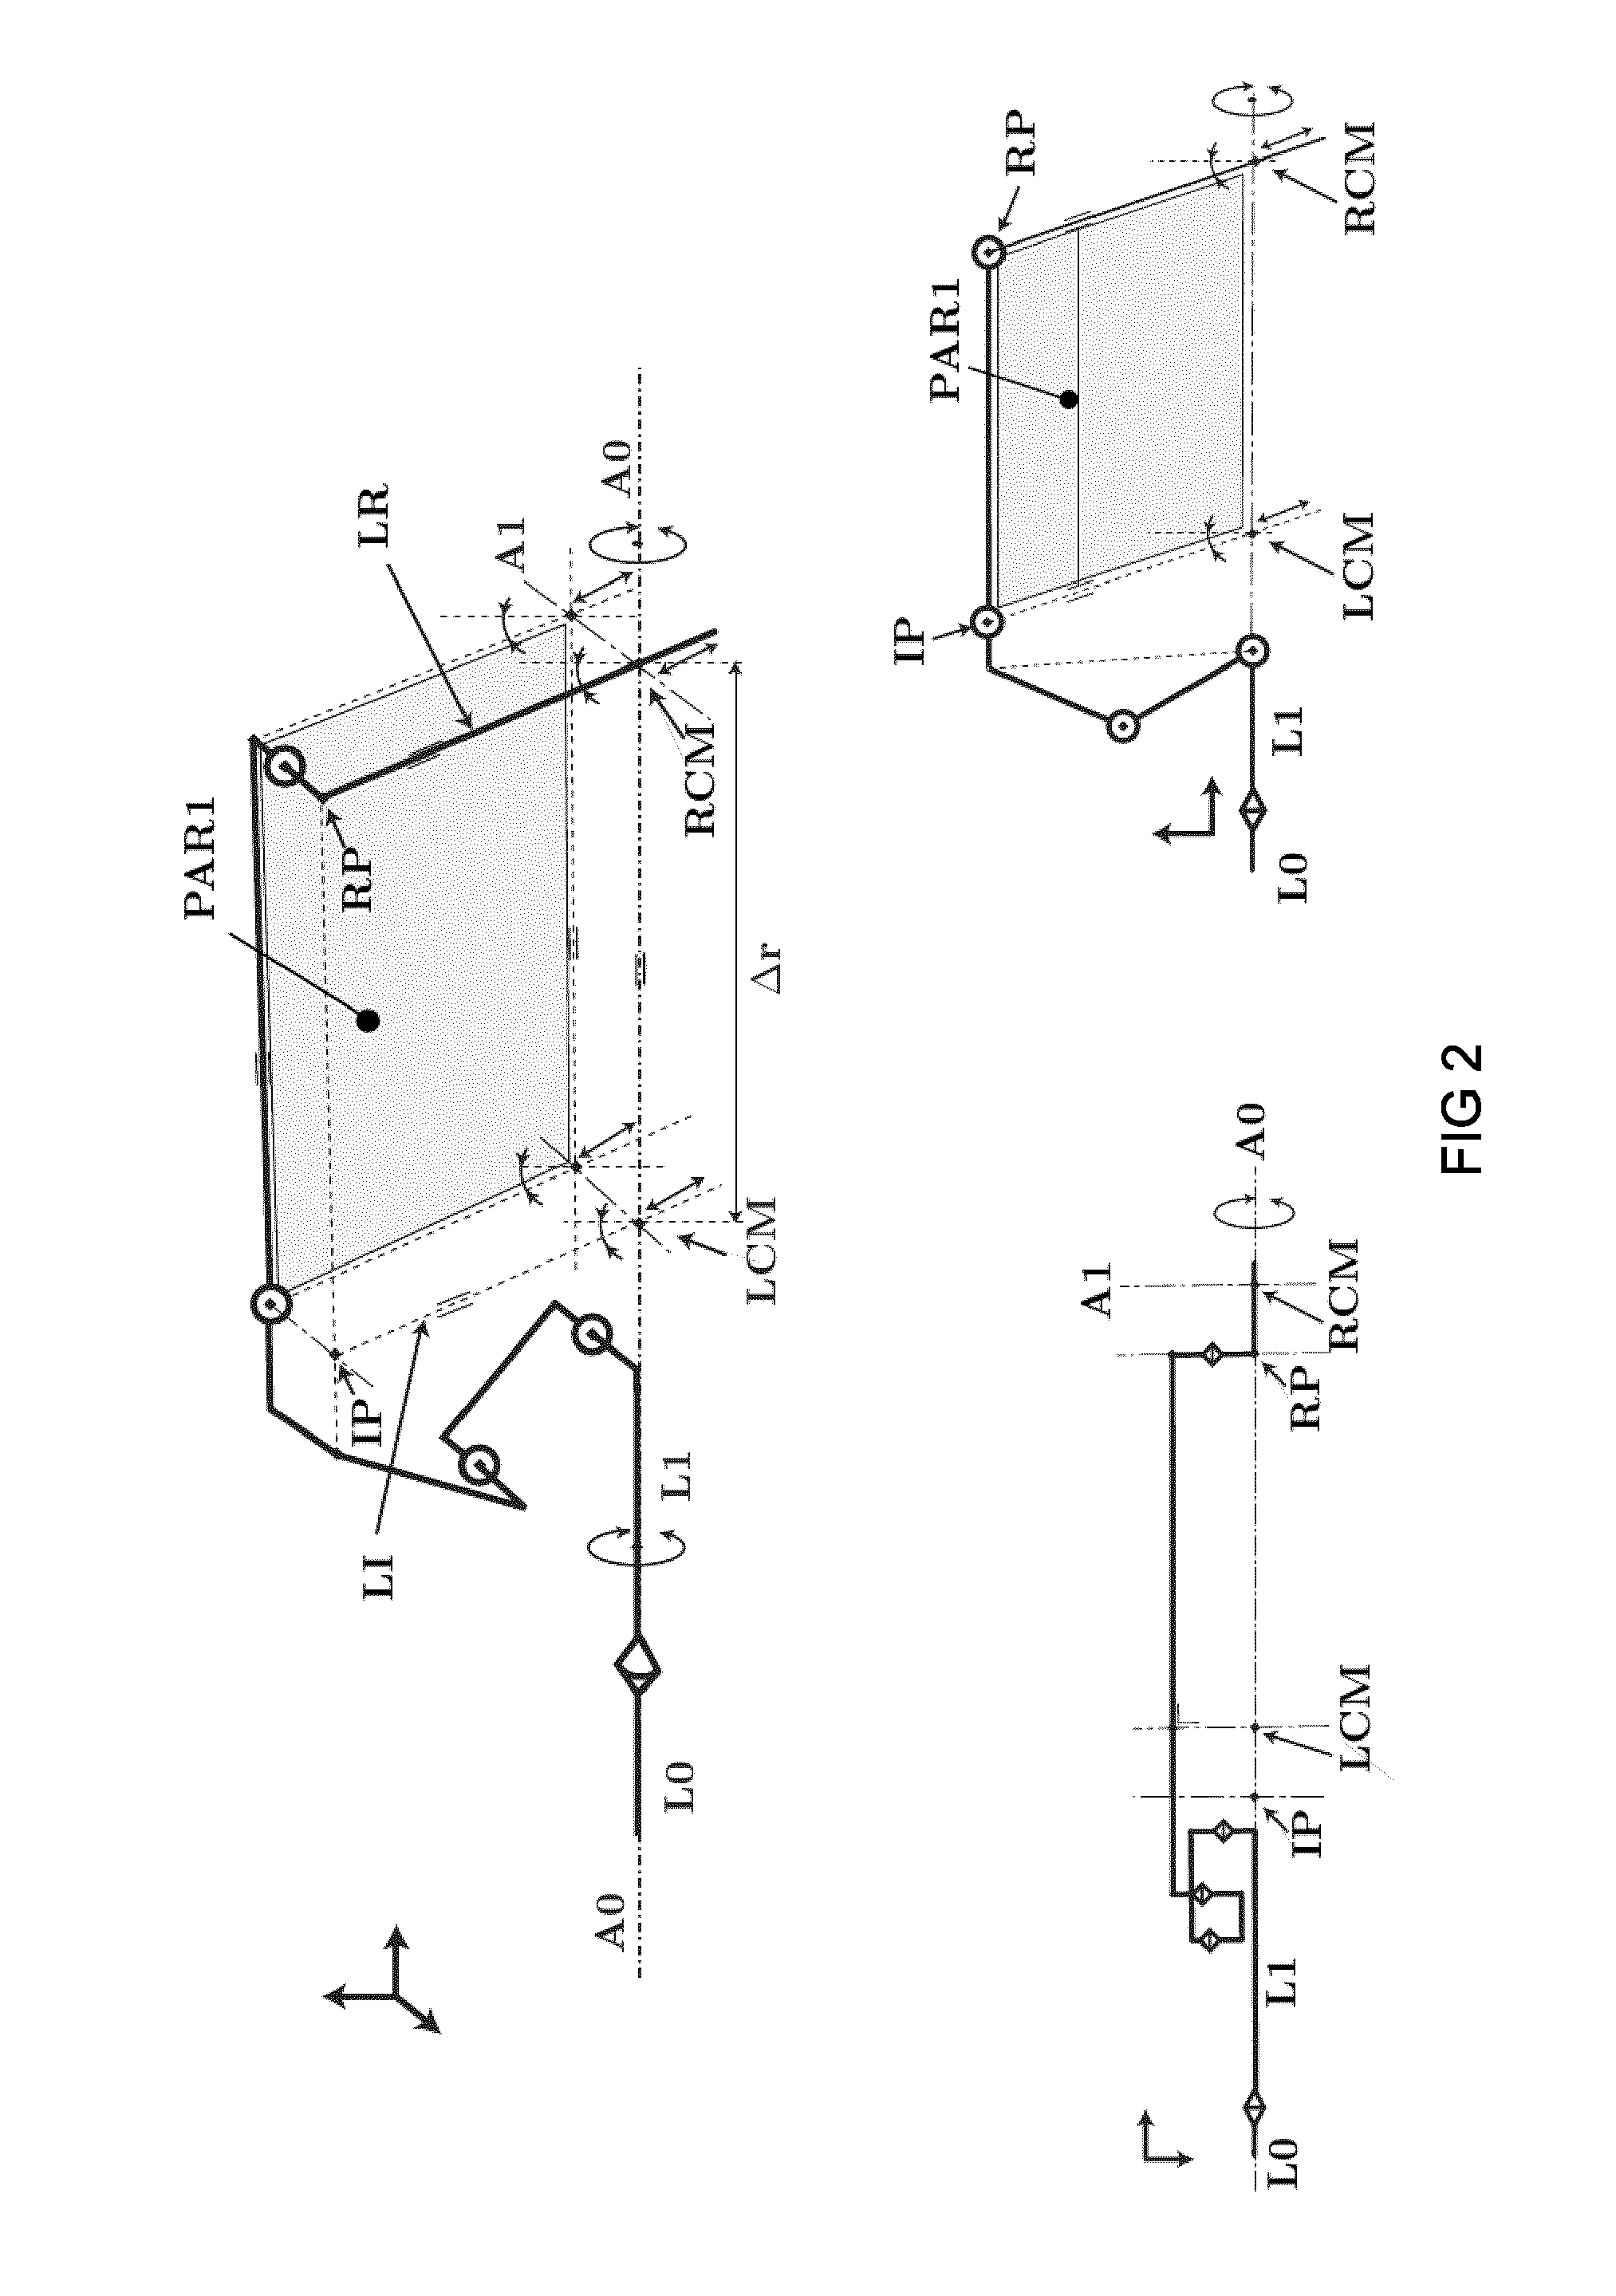 An apparatus for generating motion around a remote centre of motion